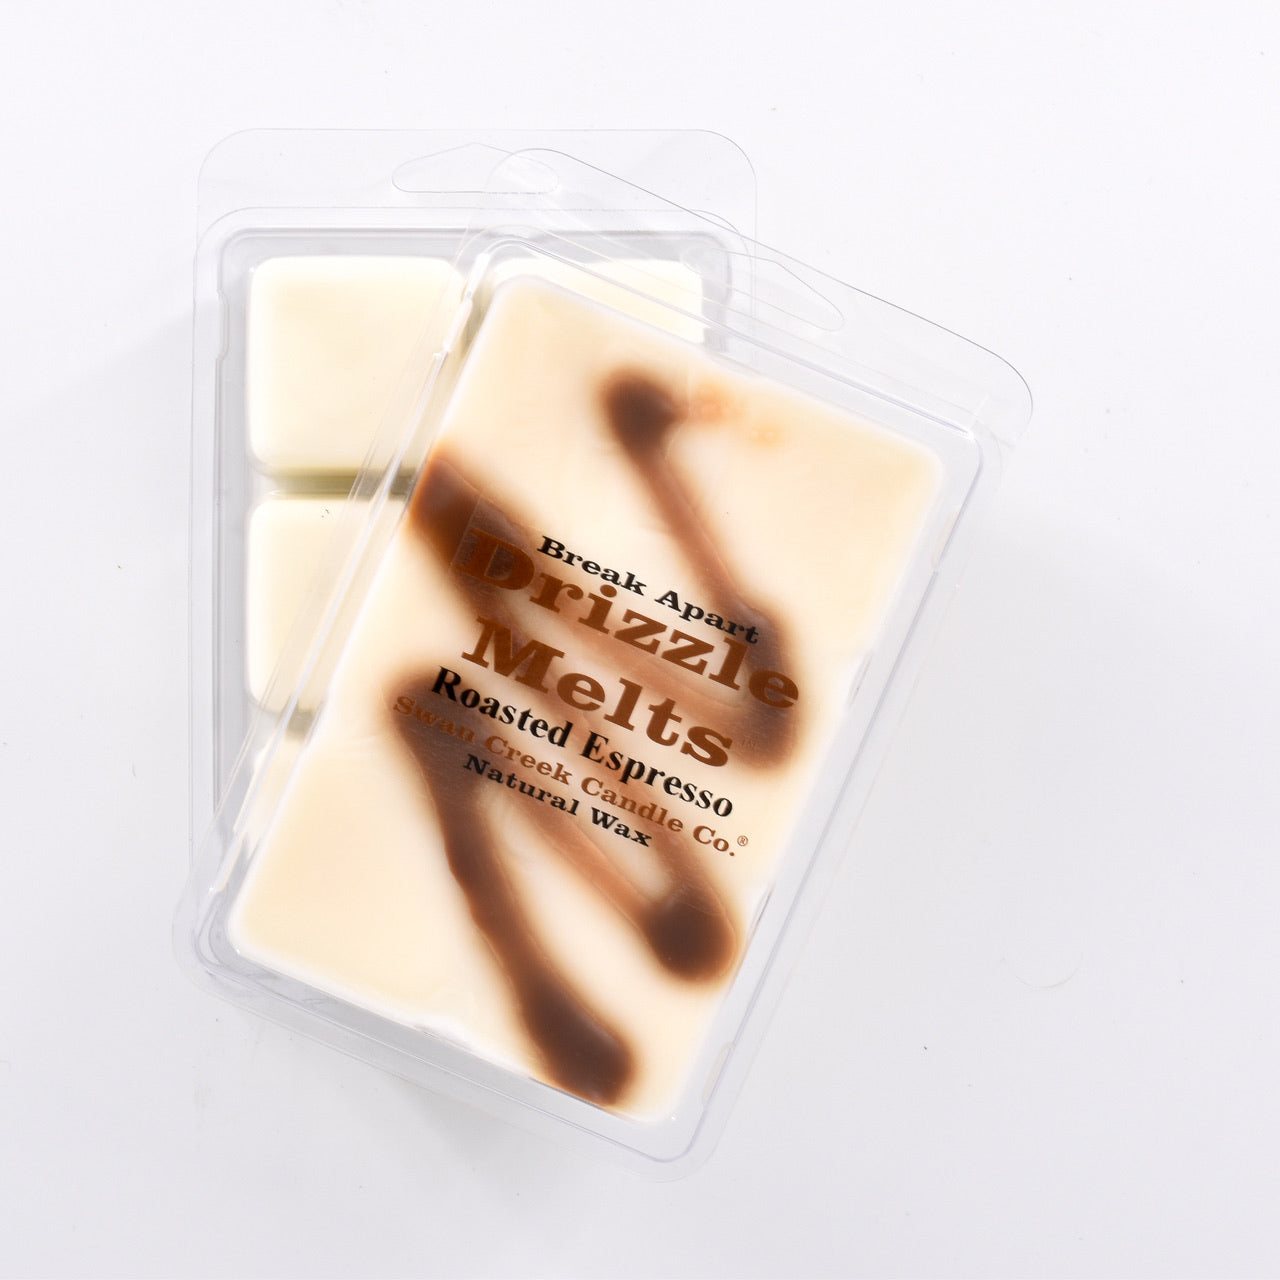 ivory wax with brown swirl across the top in packaging with another package showing the bottom of the wax melts break apart design.